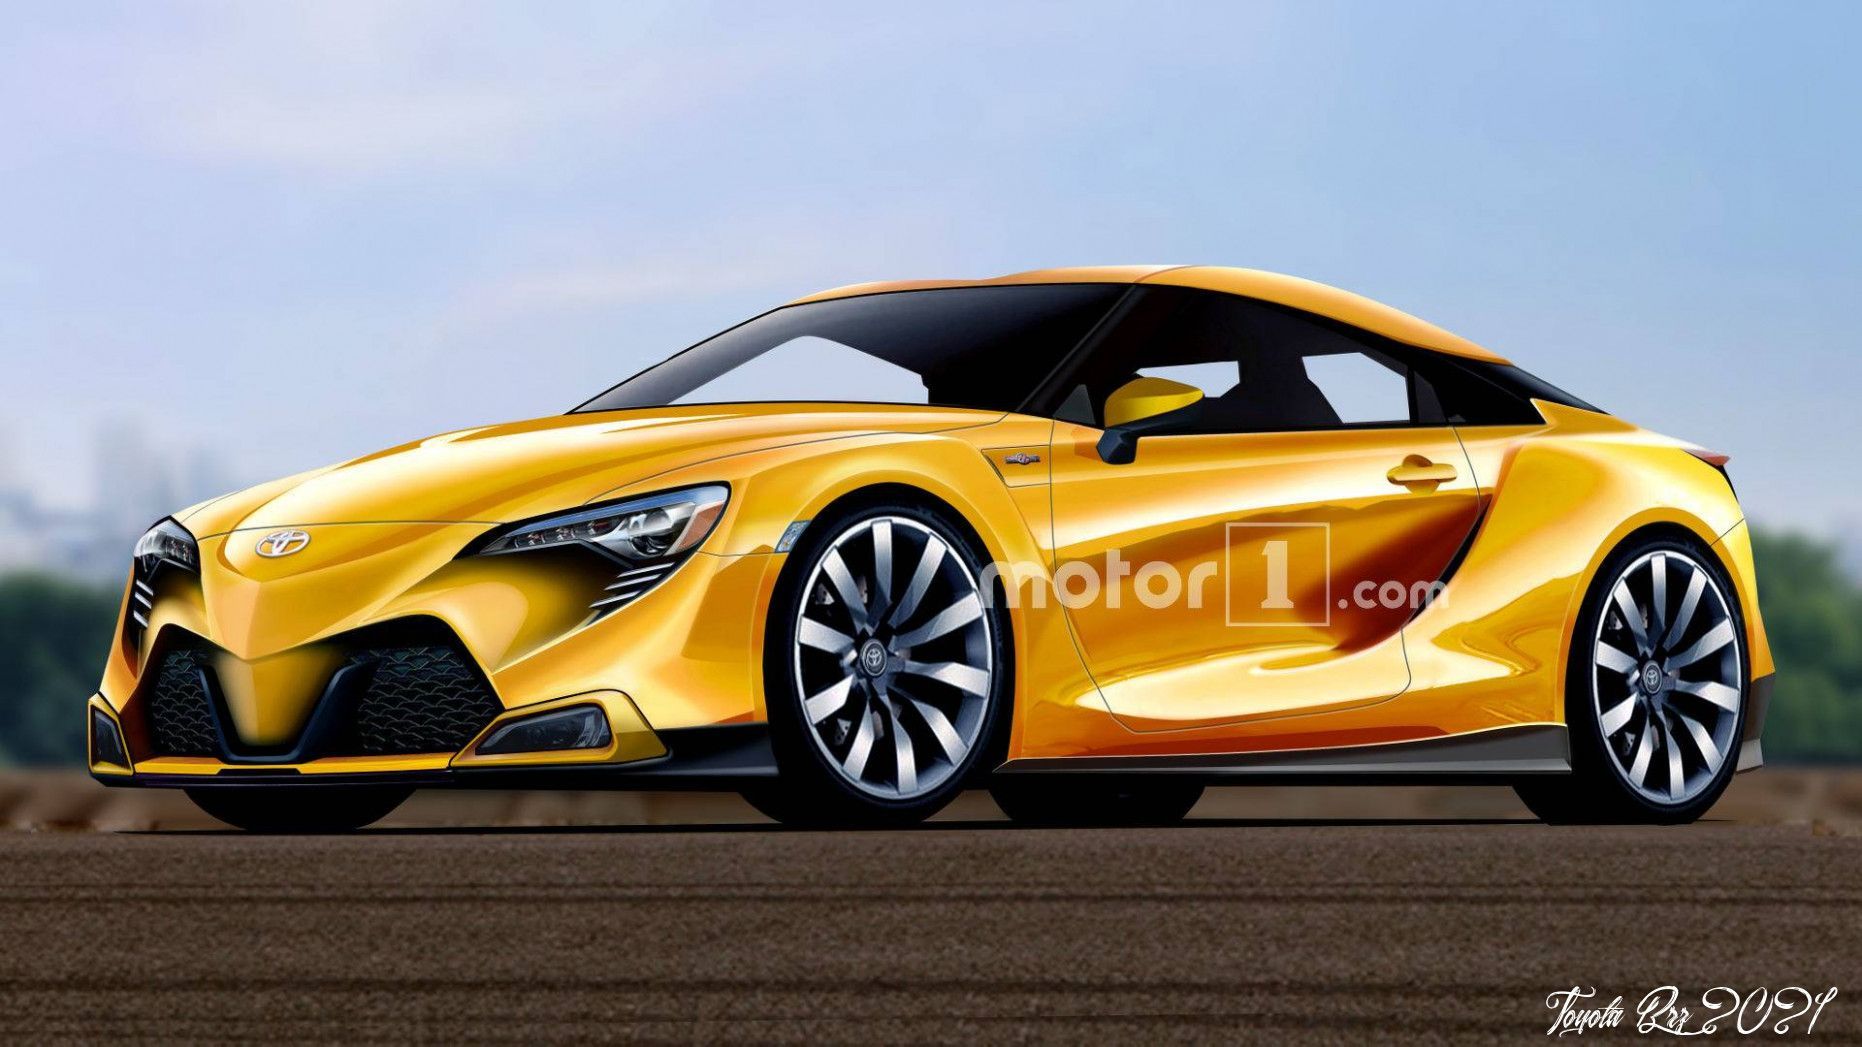 Toyota Brz 2021 Price And Release Date. Sports car, Toyota Toyota gt86